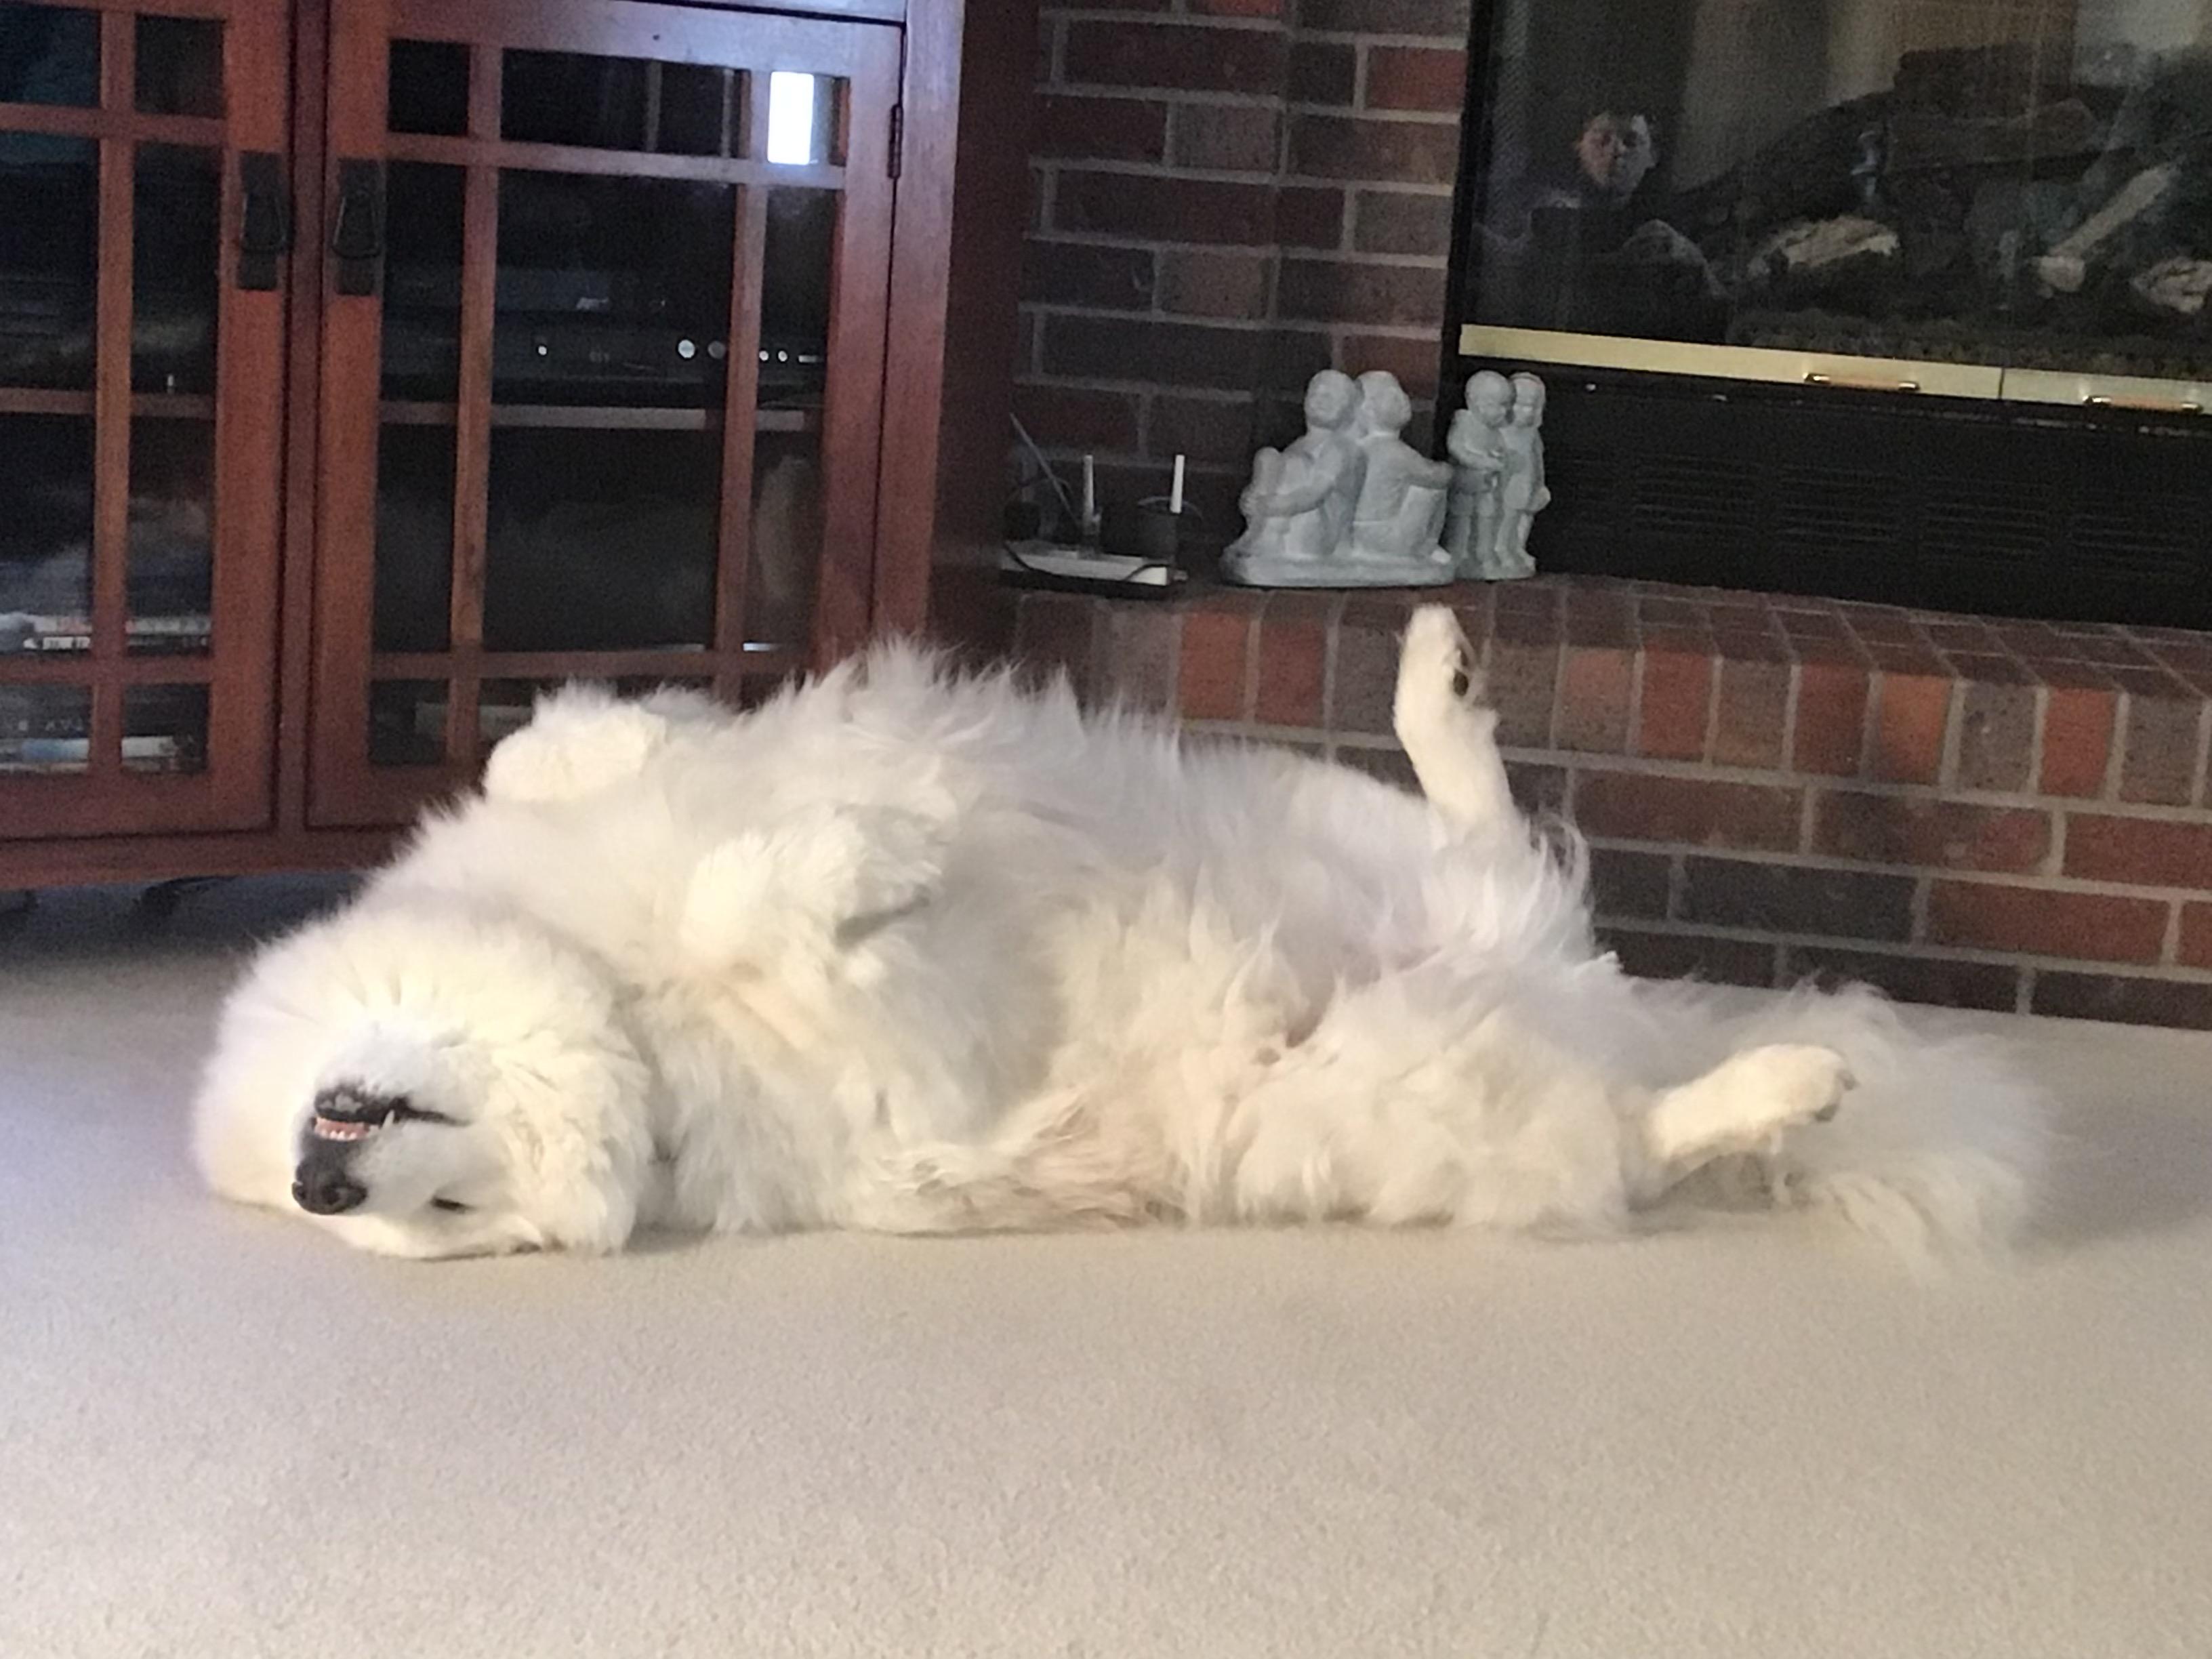 A Samoyed comfortably lying on its back on the floor